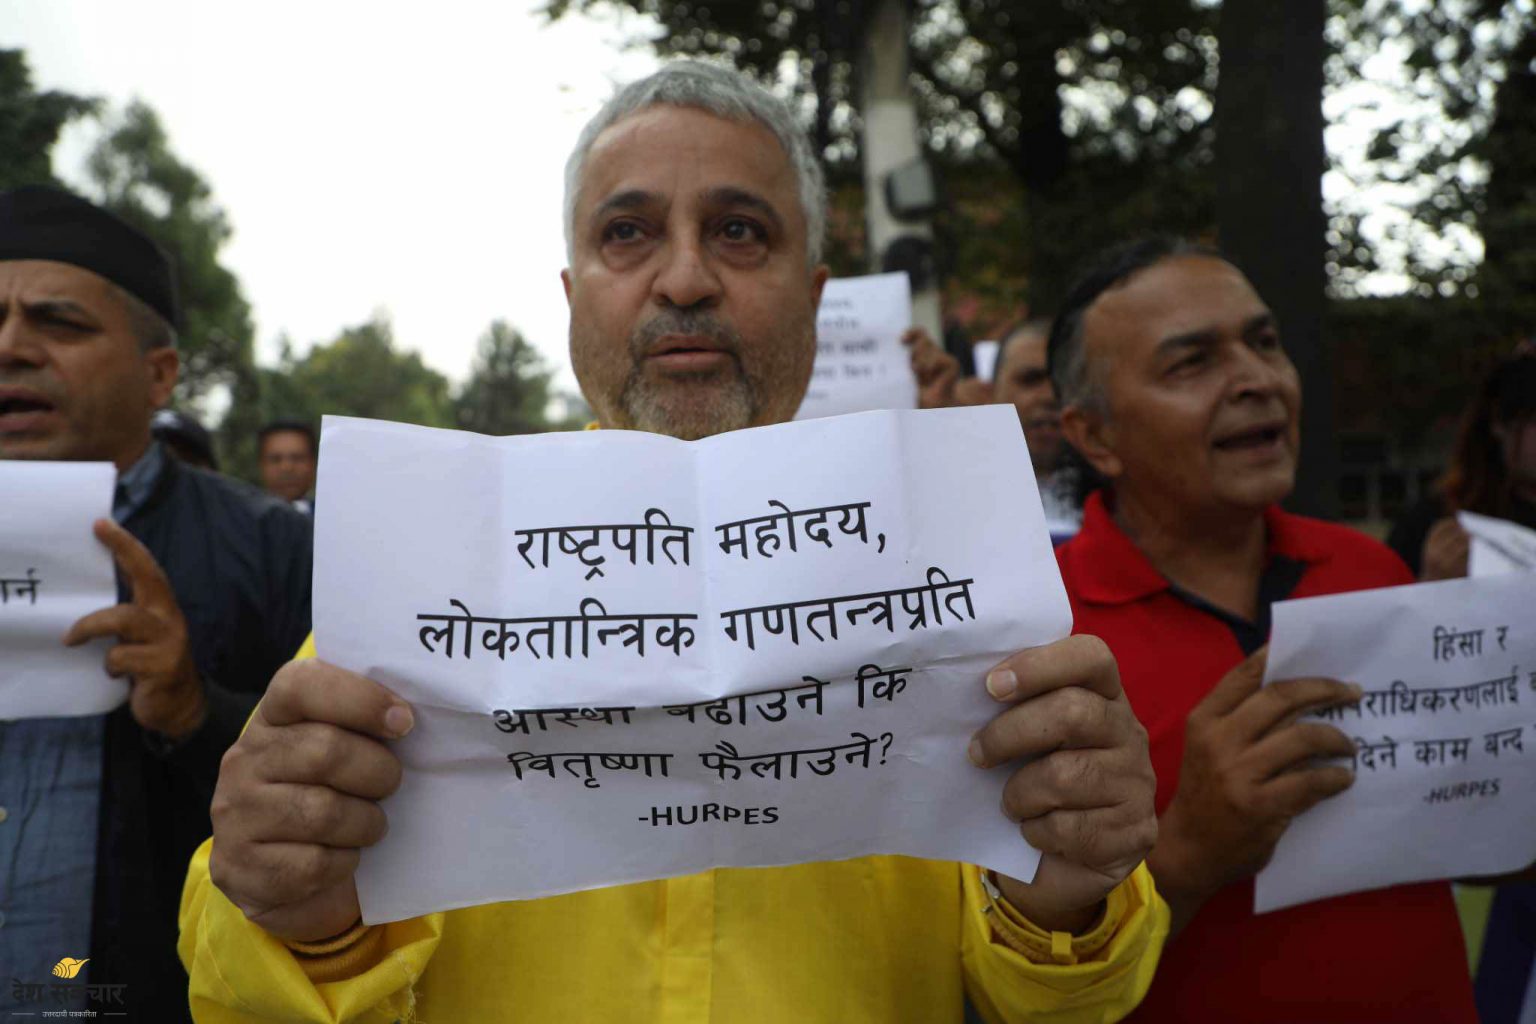 HURPES Nepal protests in front of the President’s office